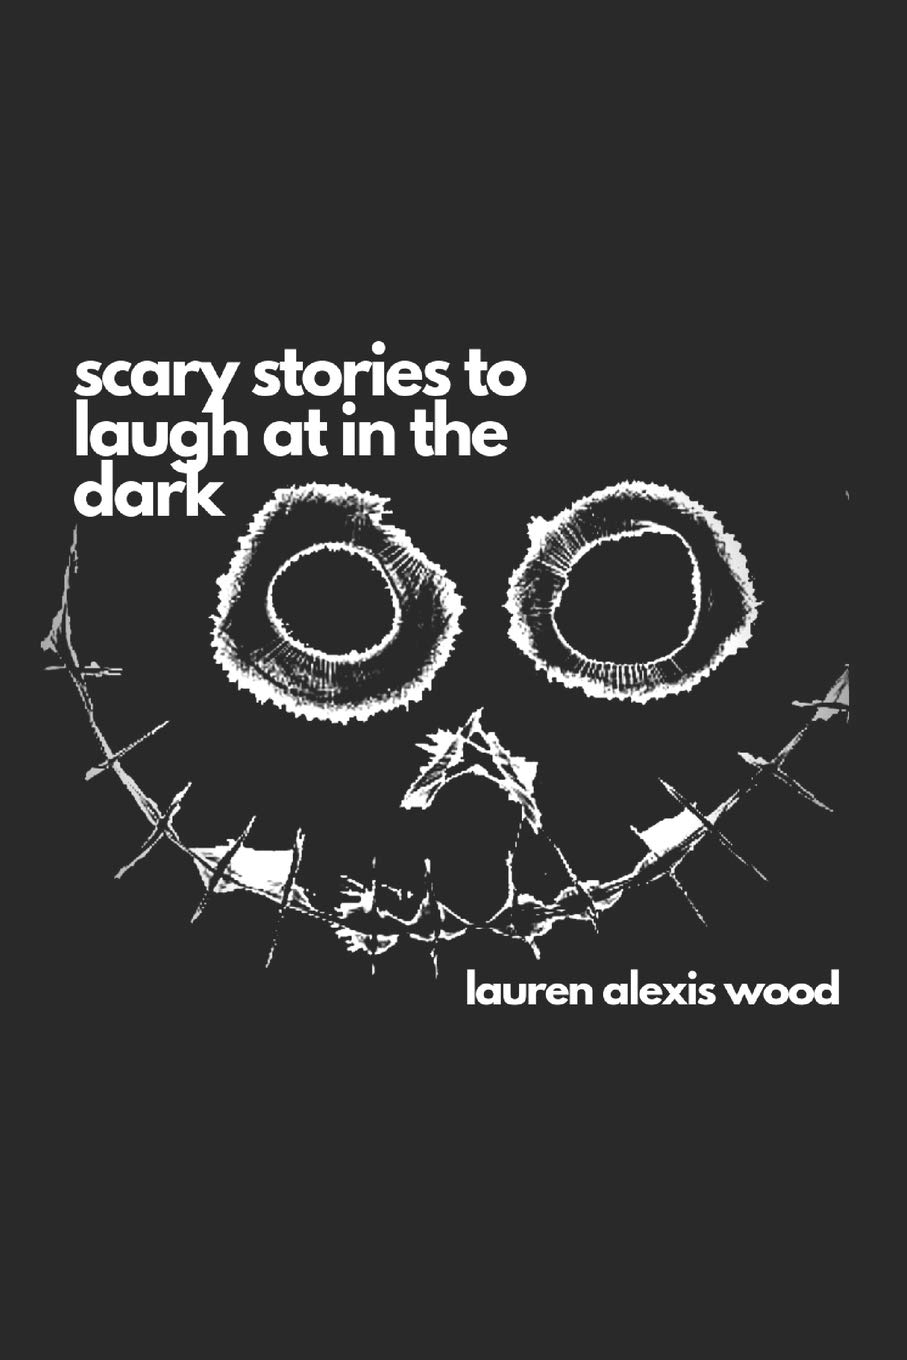 Scary Stories To Tell In The Dark Wallpapers